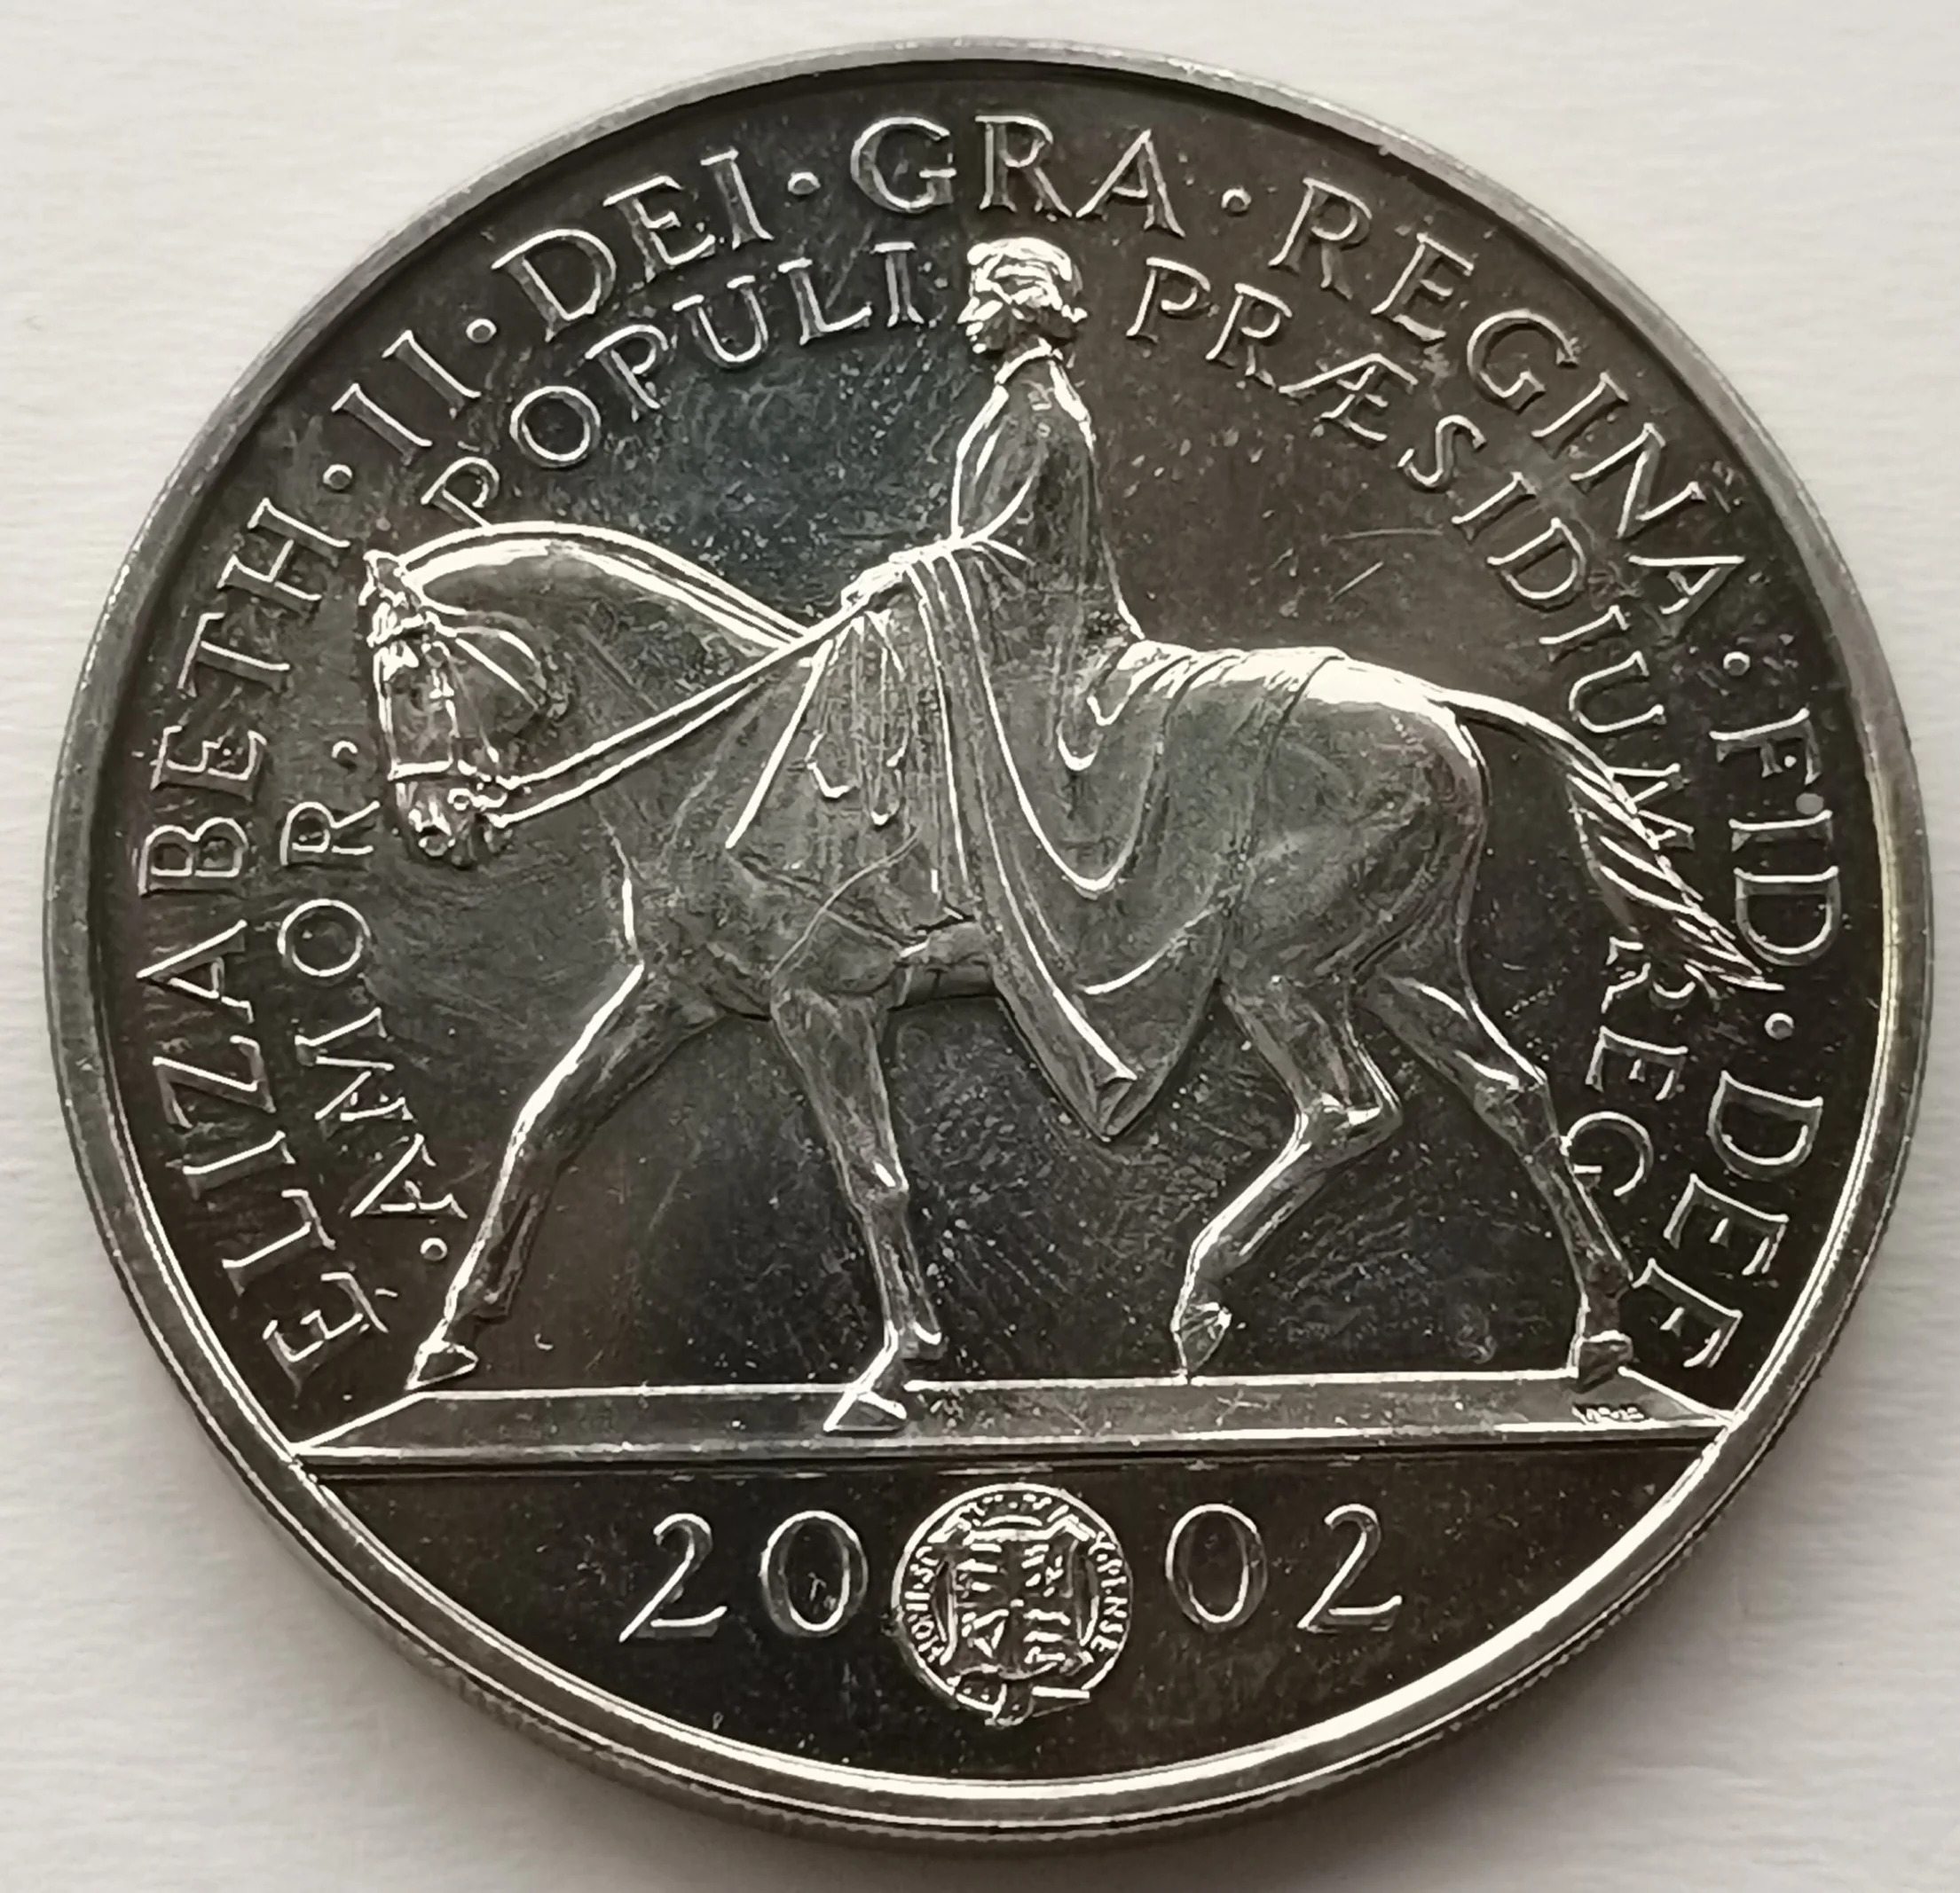 

Elizabeth the Queen's Accession to the Throne. 50 Th Anniversary UK 2002 5 Pounds Coin Copper Nickel Kronor Coin Horse Riding